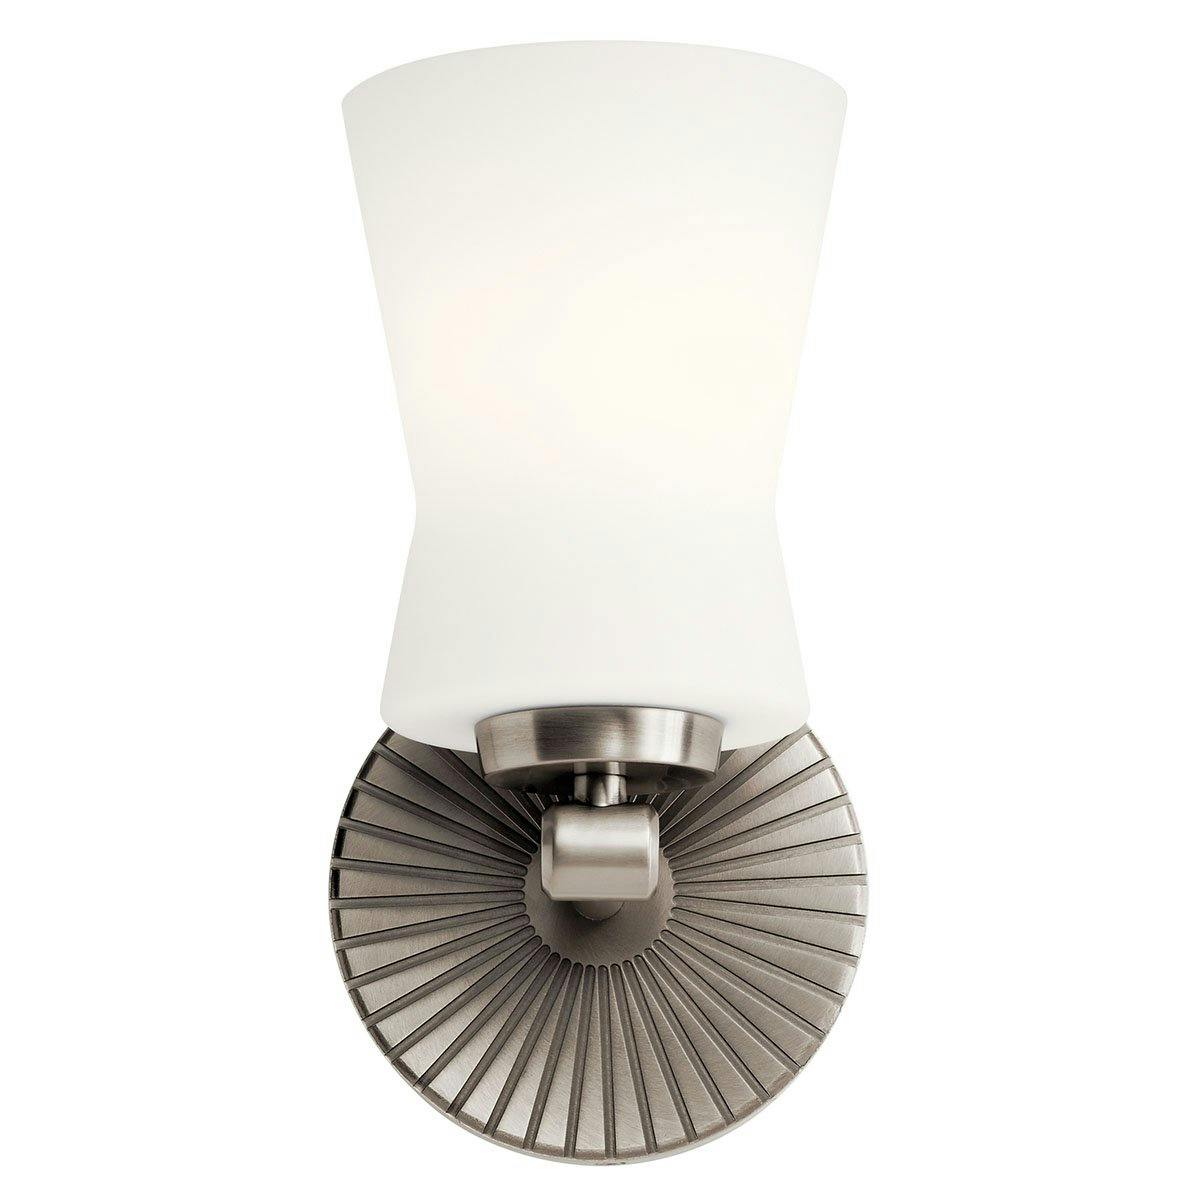 Front view of the Brianne 1 Light Sconce Classic Pewter on a white background